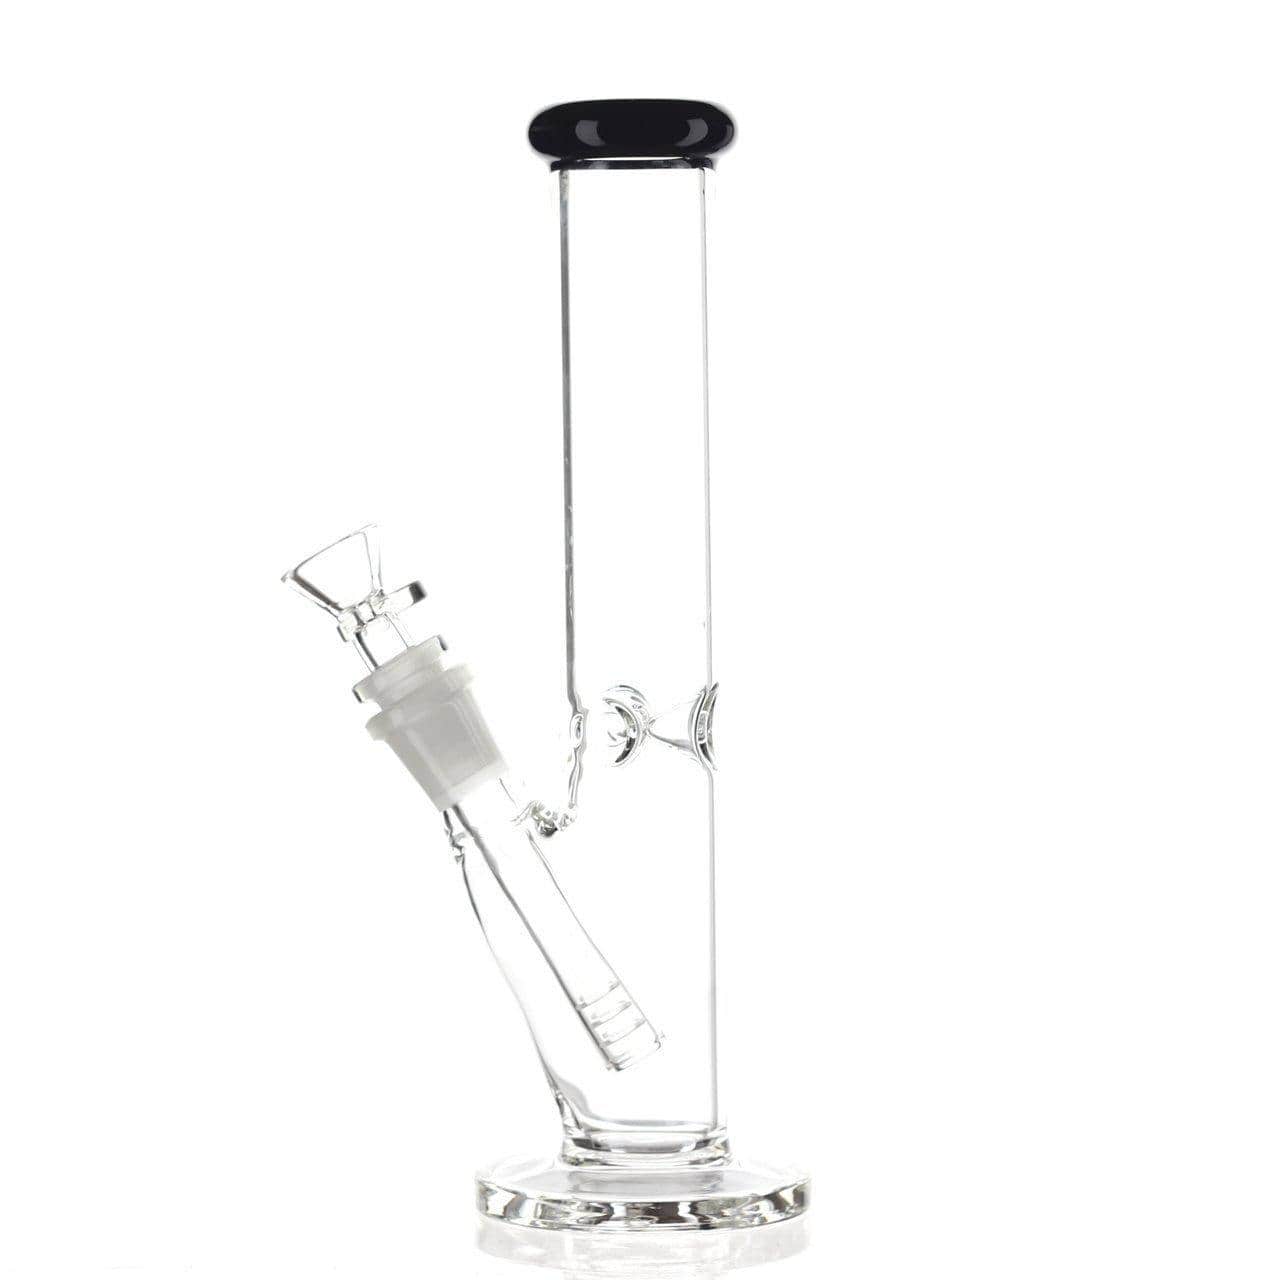 YNY Glass The Straight Shooter Bong